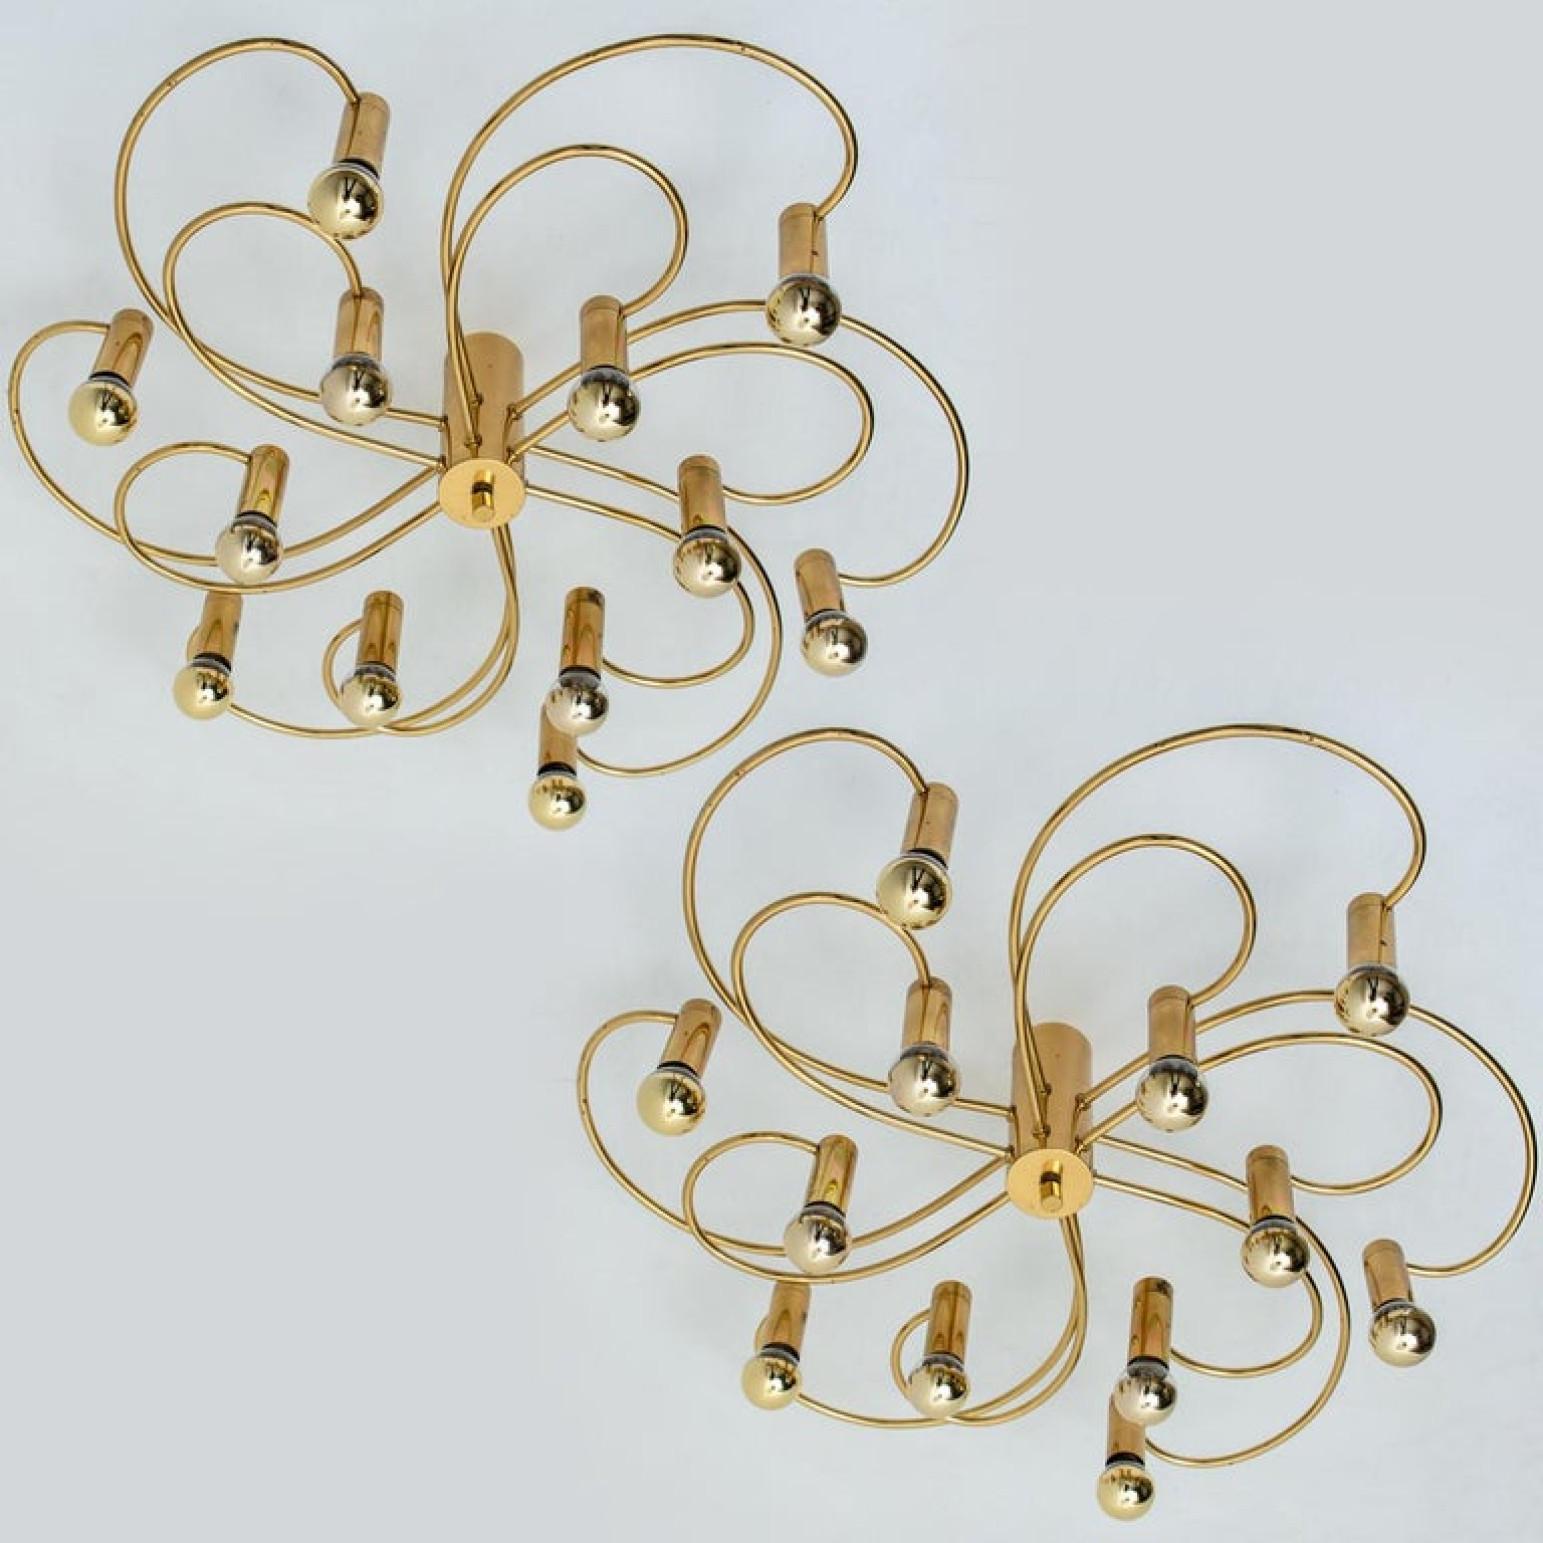 1 of the 2 Leola Sculptural Brass 13-Light Ceiling or Wall Flush Mount, 1970s For Sale 6